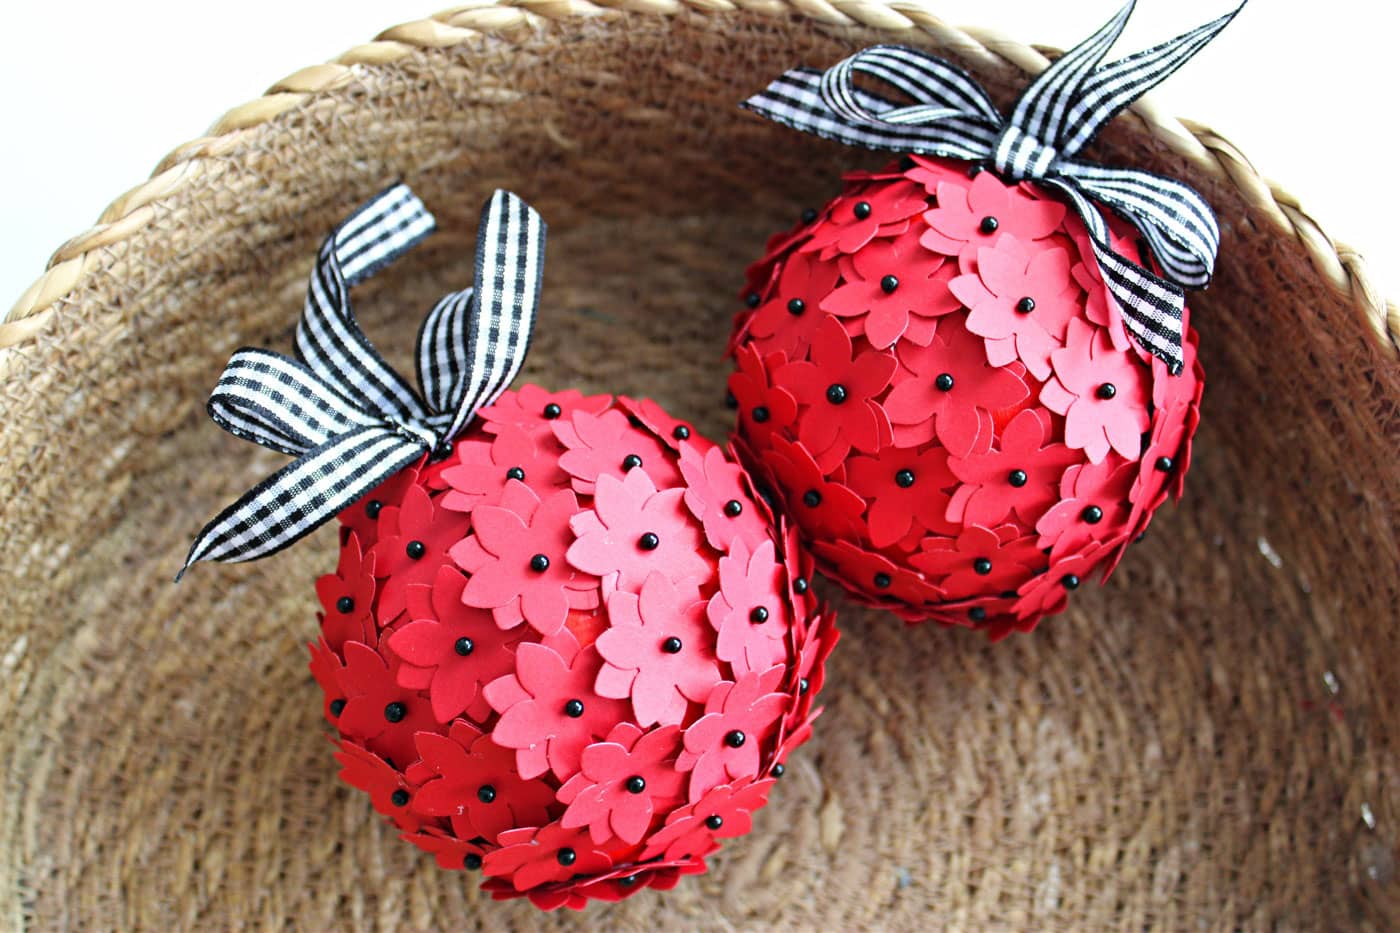 red and black christmas ornament in straw basket